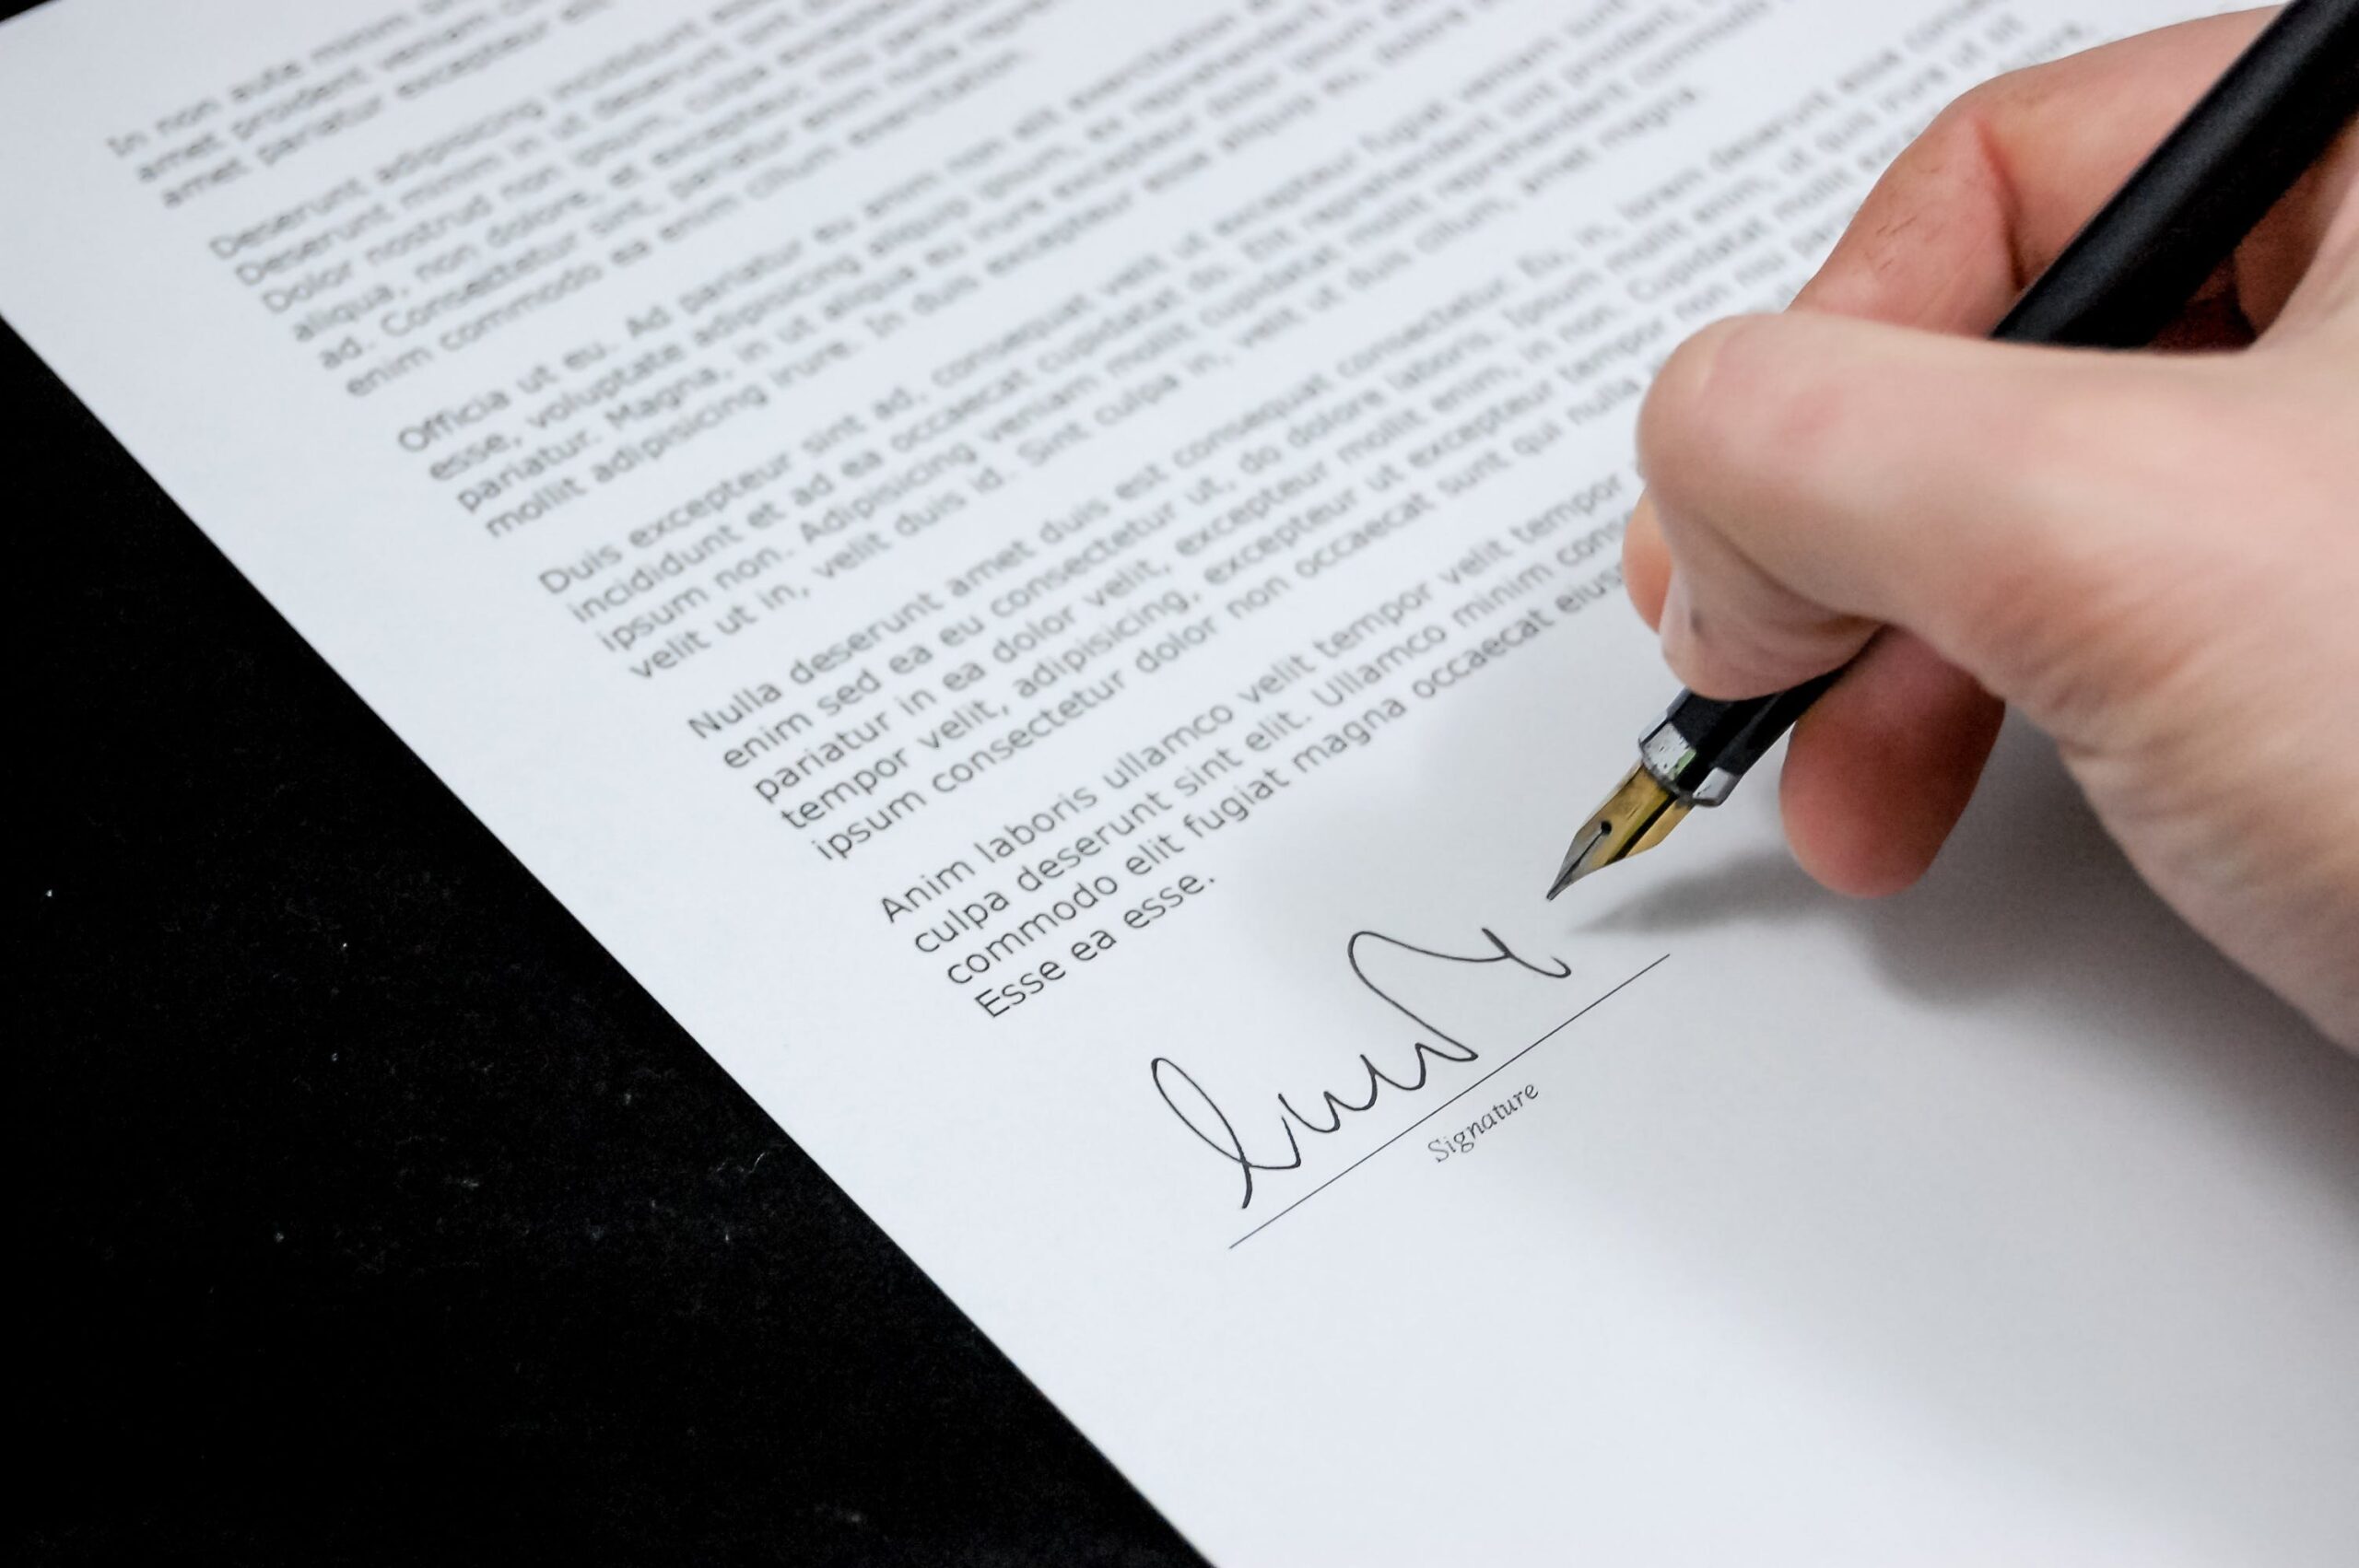 What Are the Best Practices for Formatting a Business Letter?